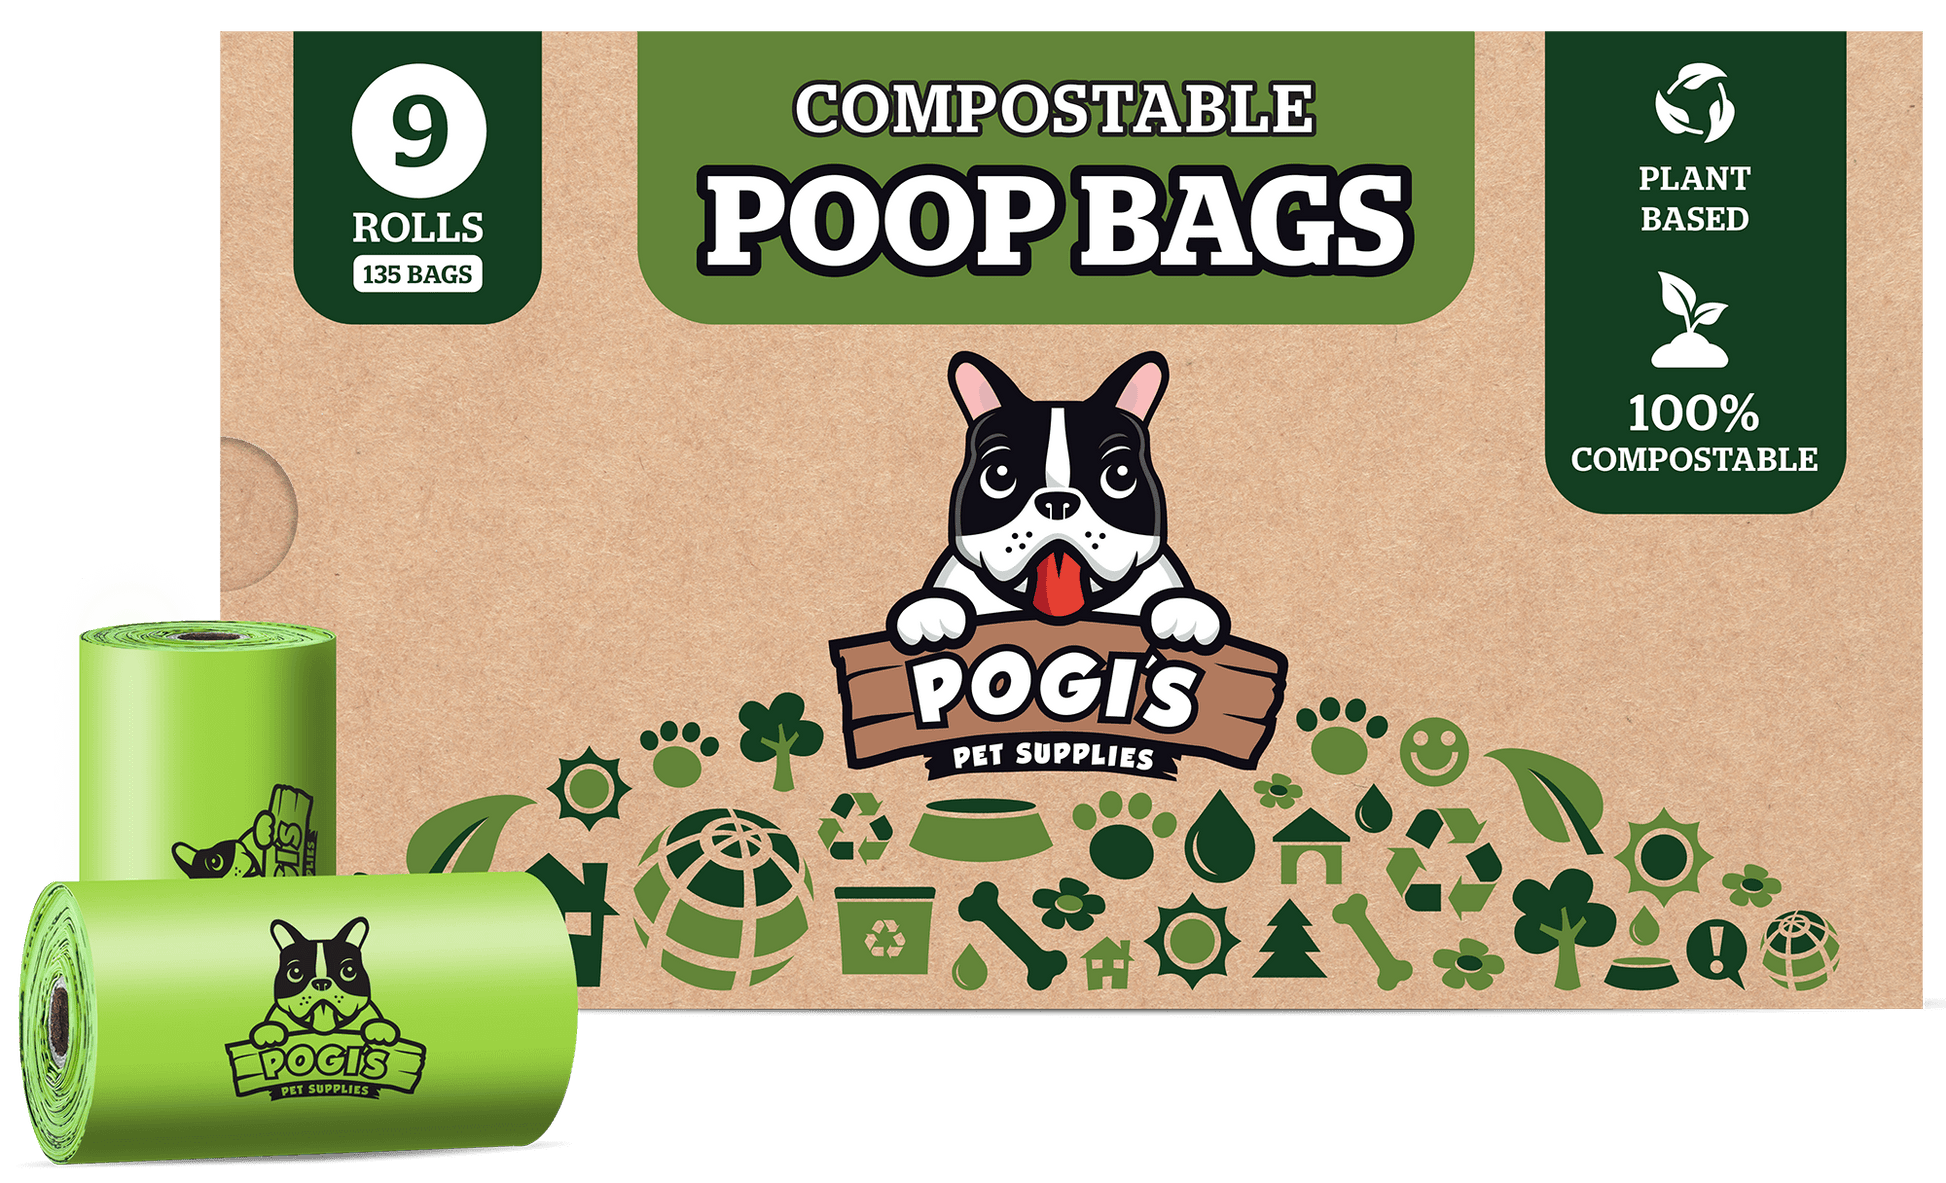 Pet One Doggy Waste Bags Compostable 6 Rolls X 20 Bags Per Roll